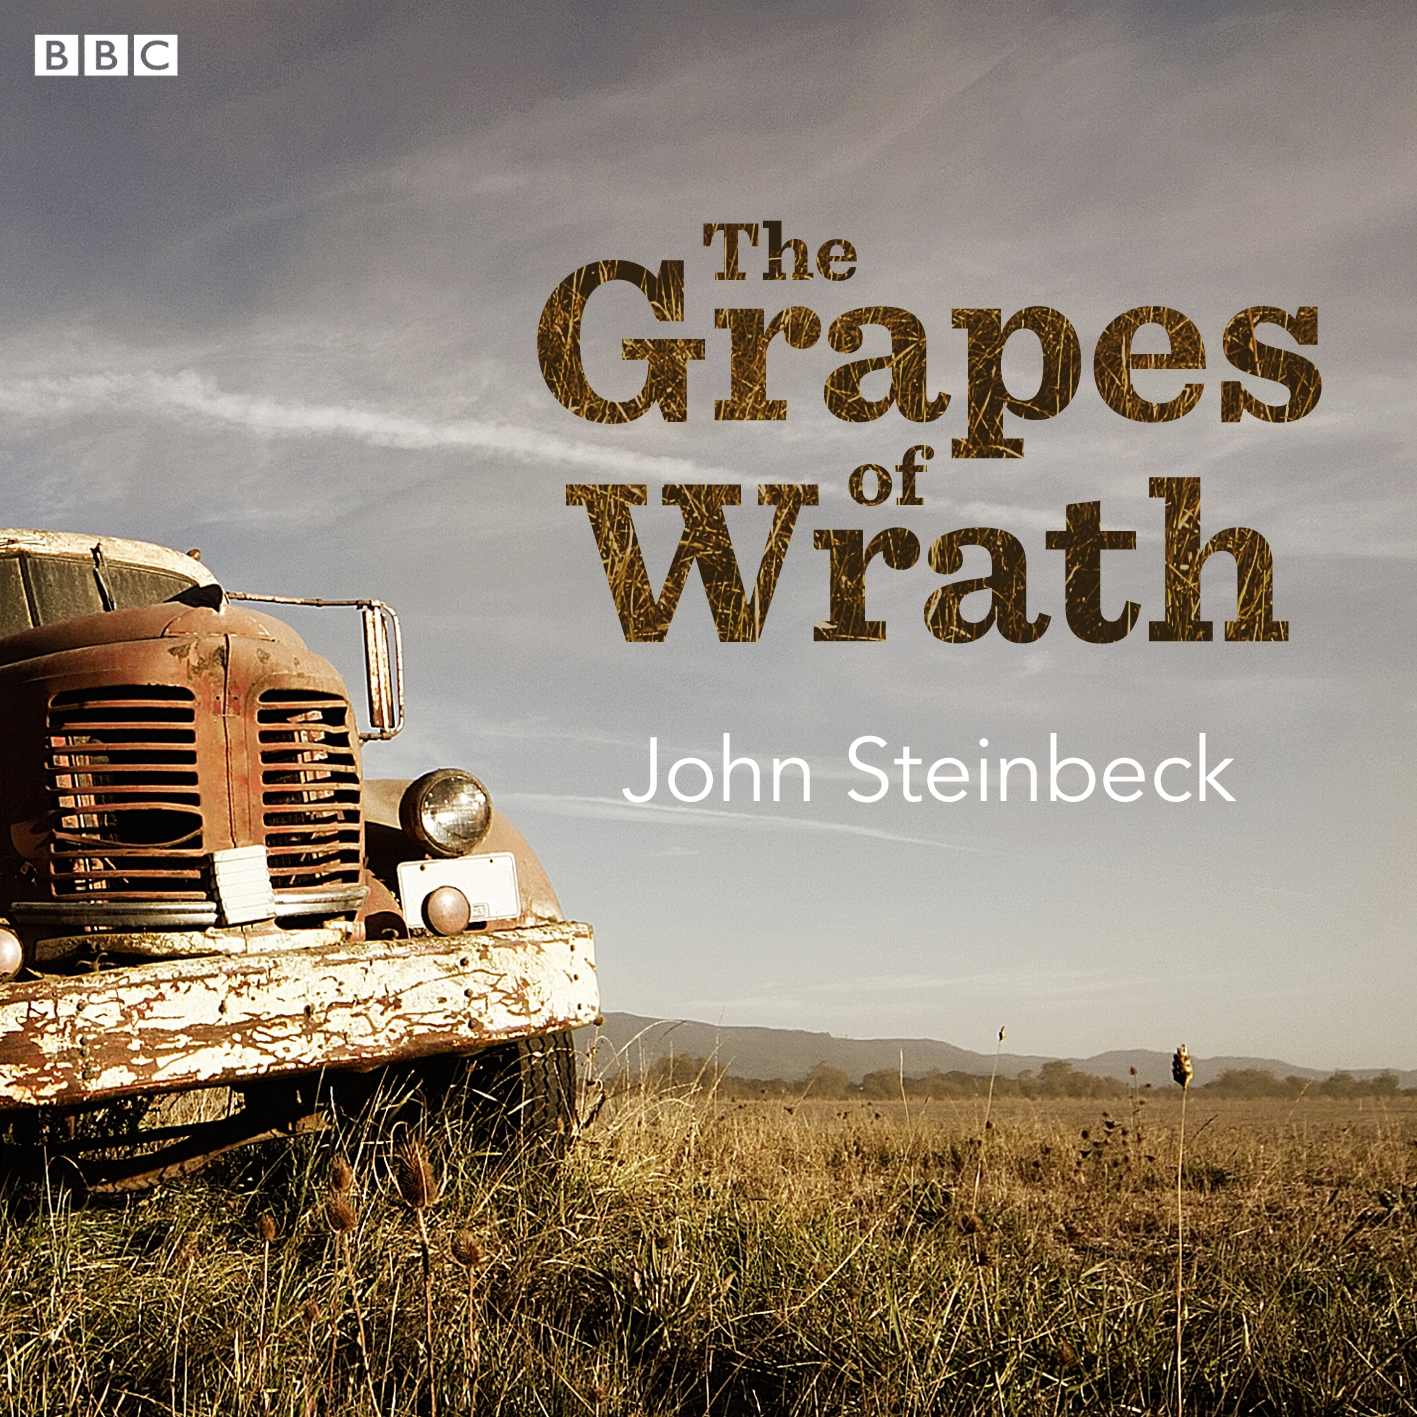 Dust Bowl Migration In John Steinbecks The Grapes Of Wrath